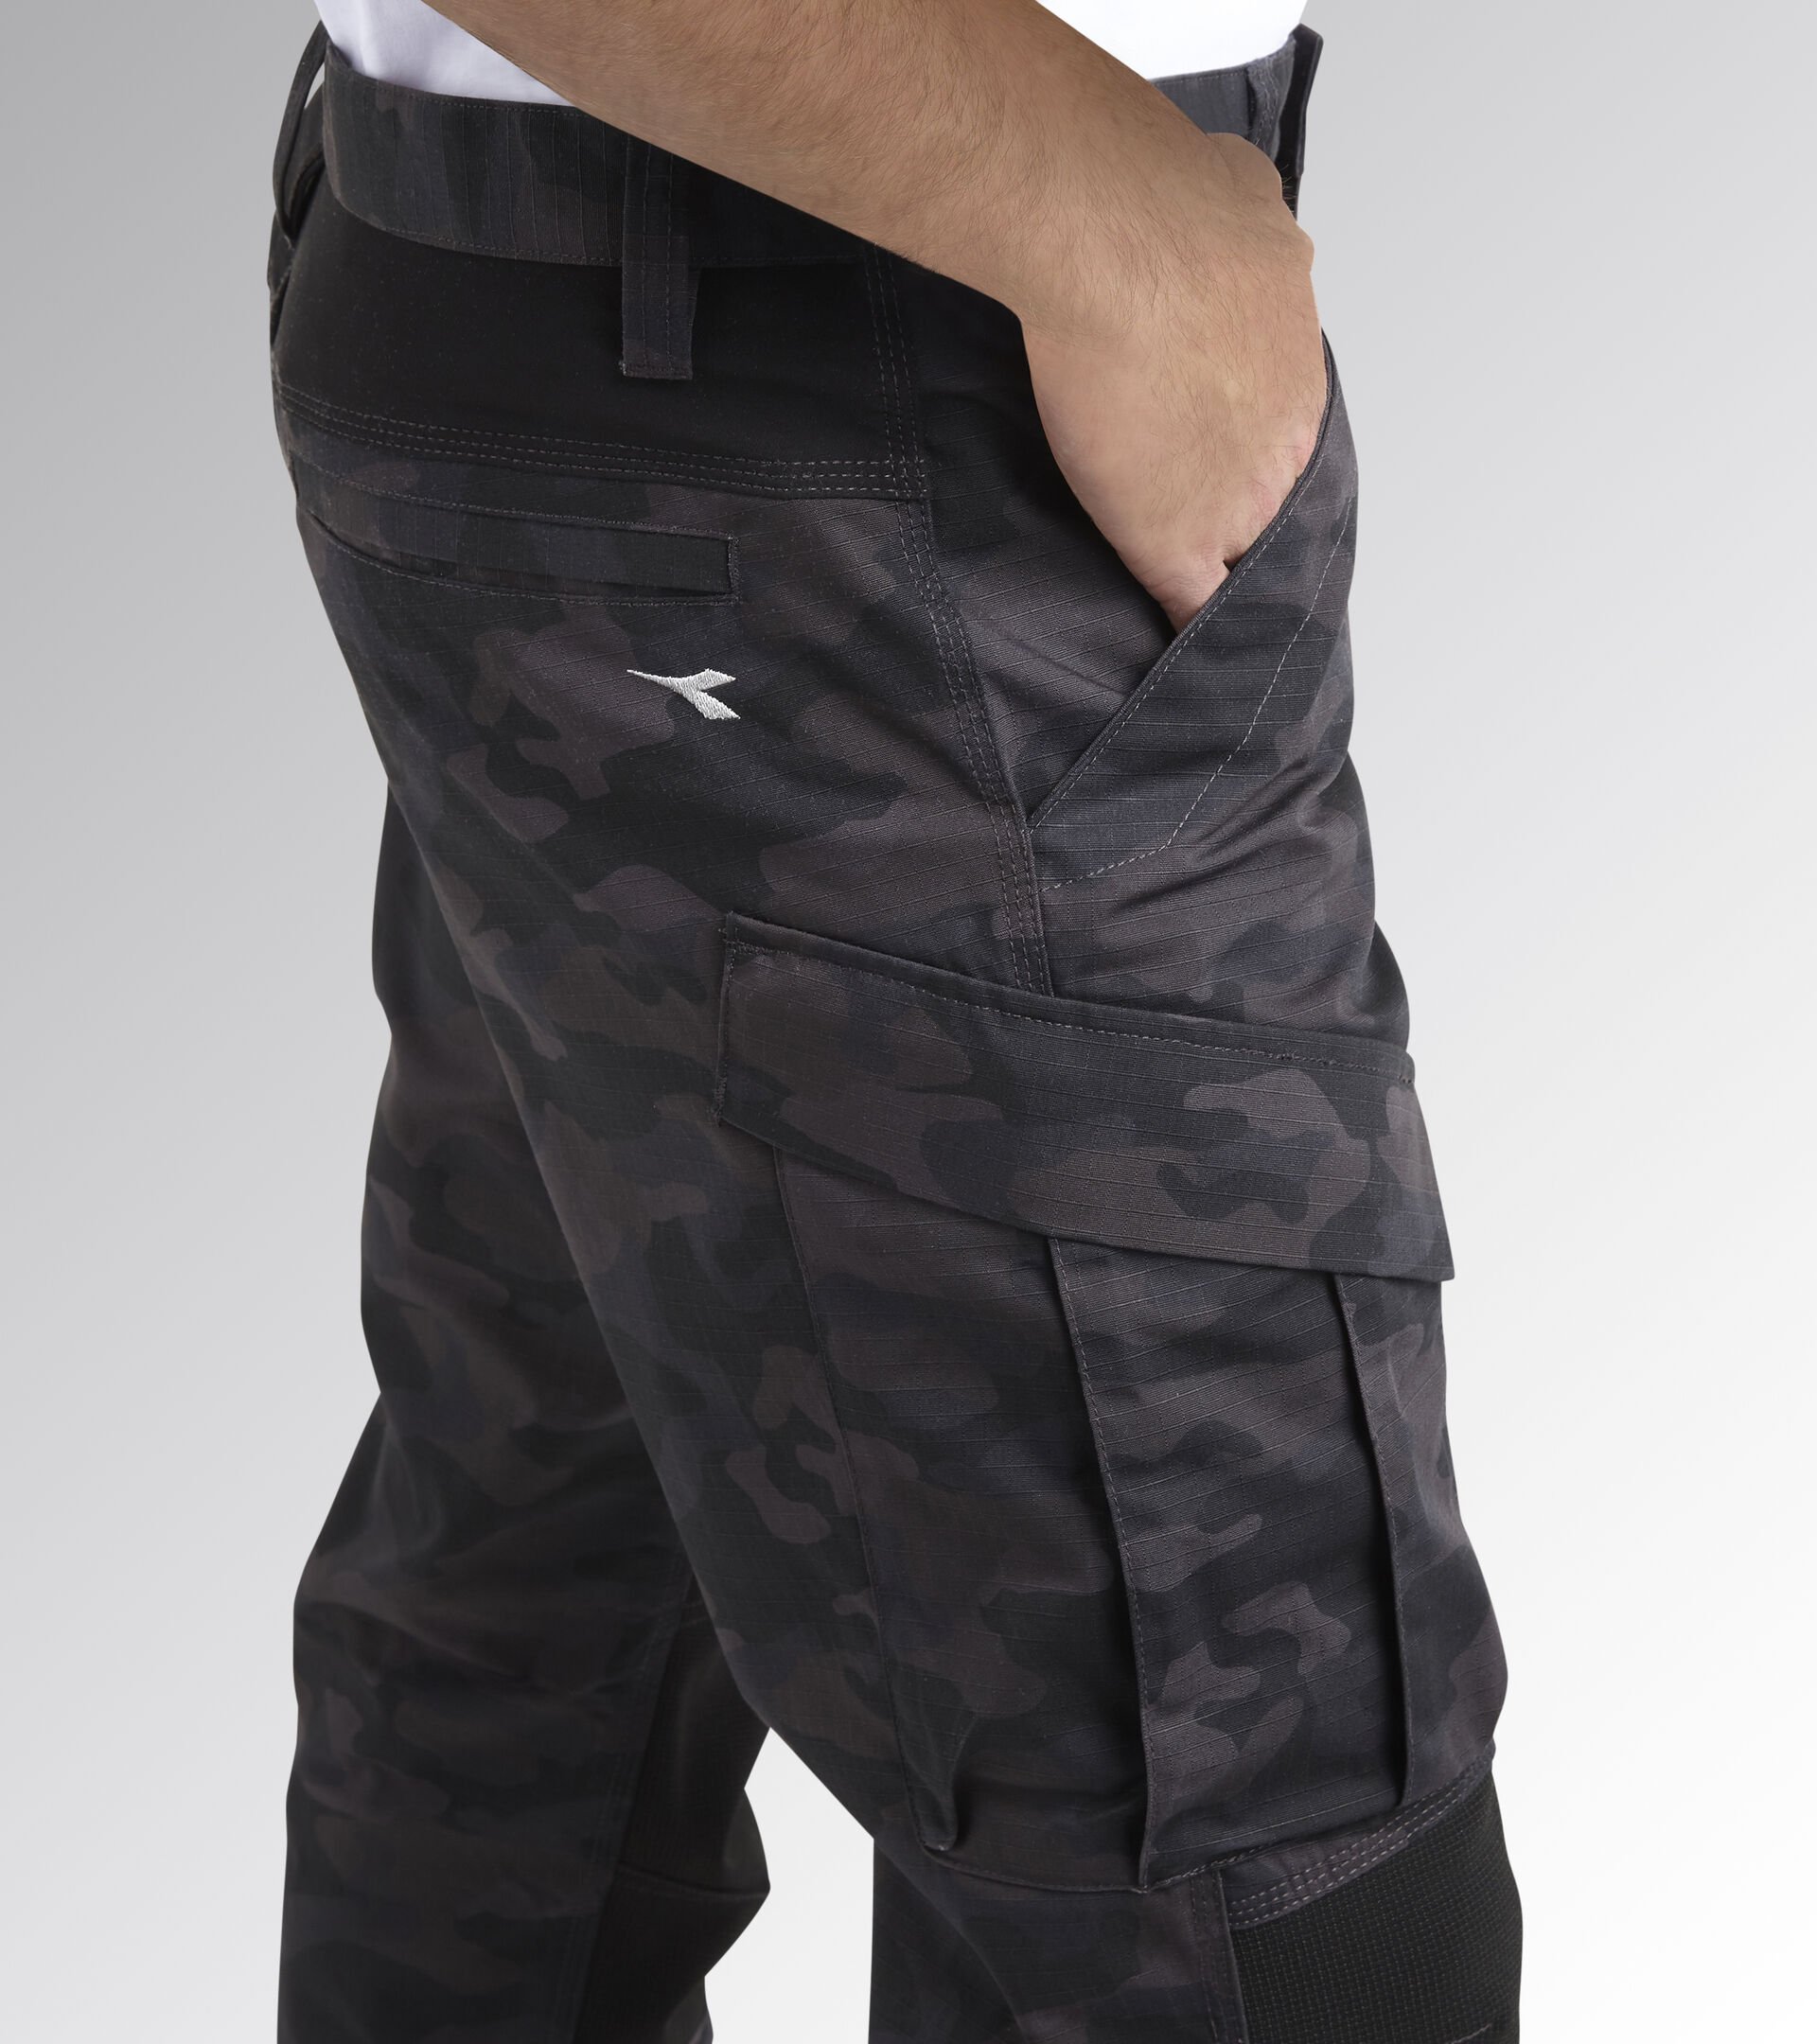 Work trousers PANT RIPSTOP CARGO CAMO GRAY CAMOUFLAGE - Utility